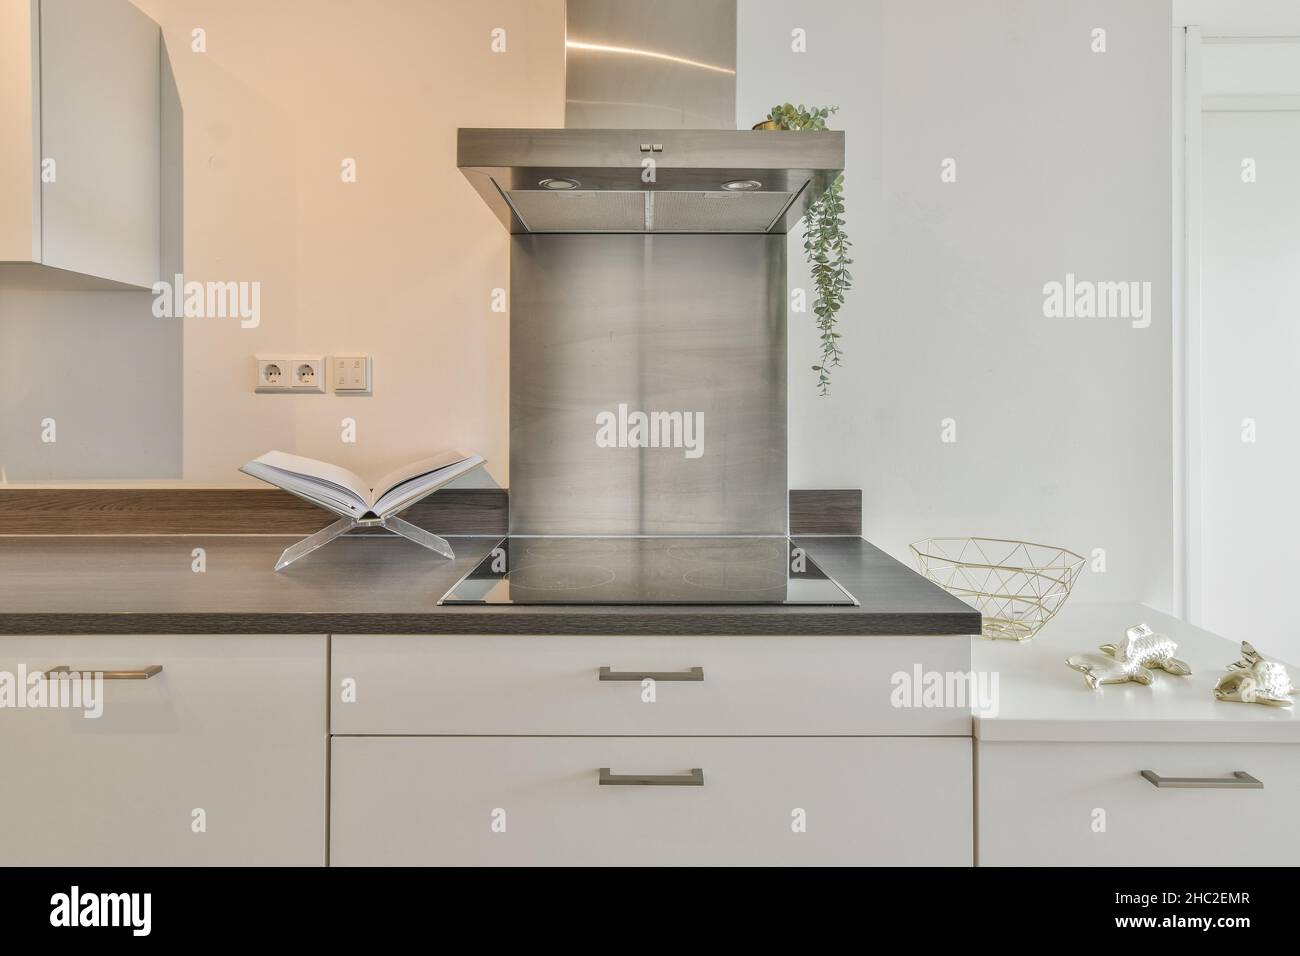 Electronic cooker with a range hood and a flower in a pot above it Stock Photo